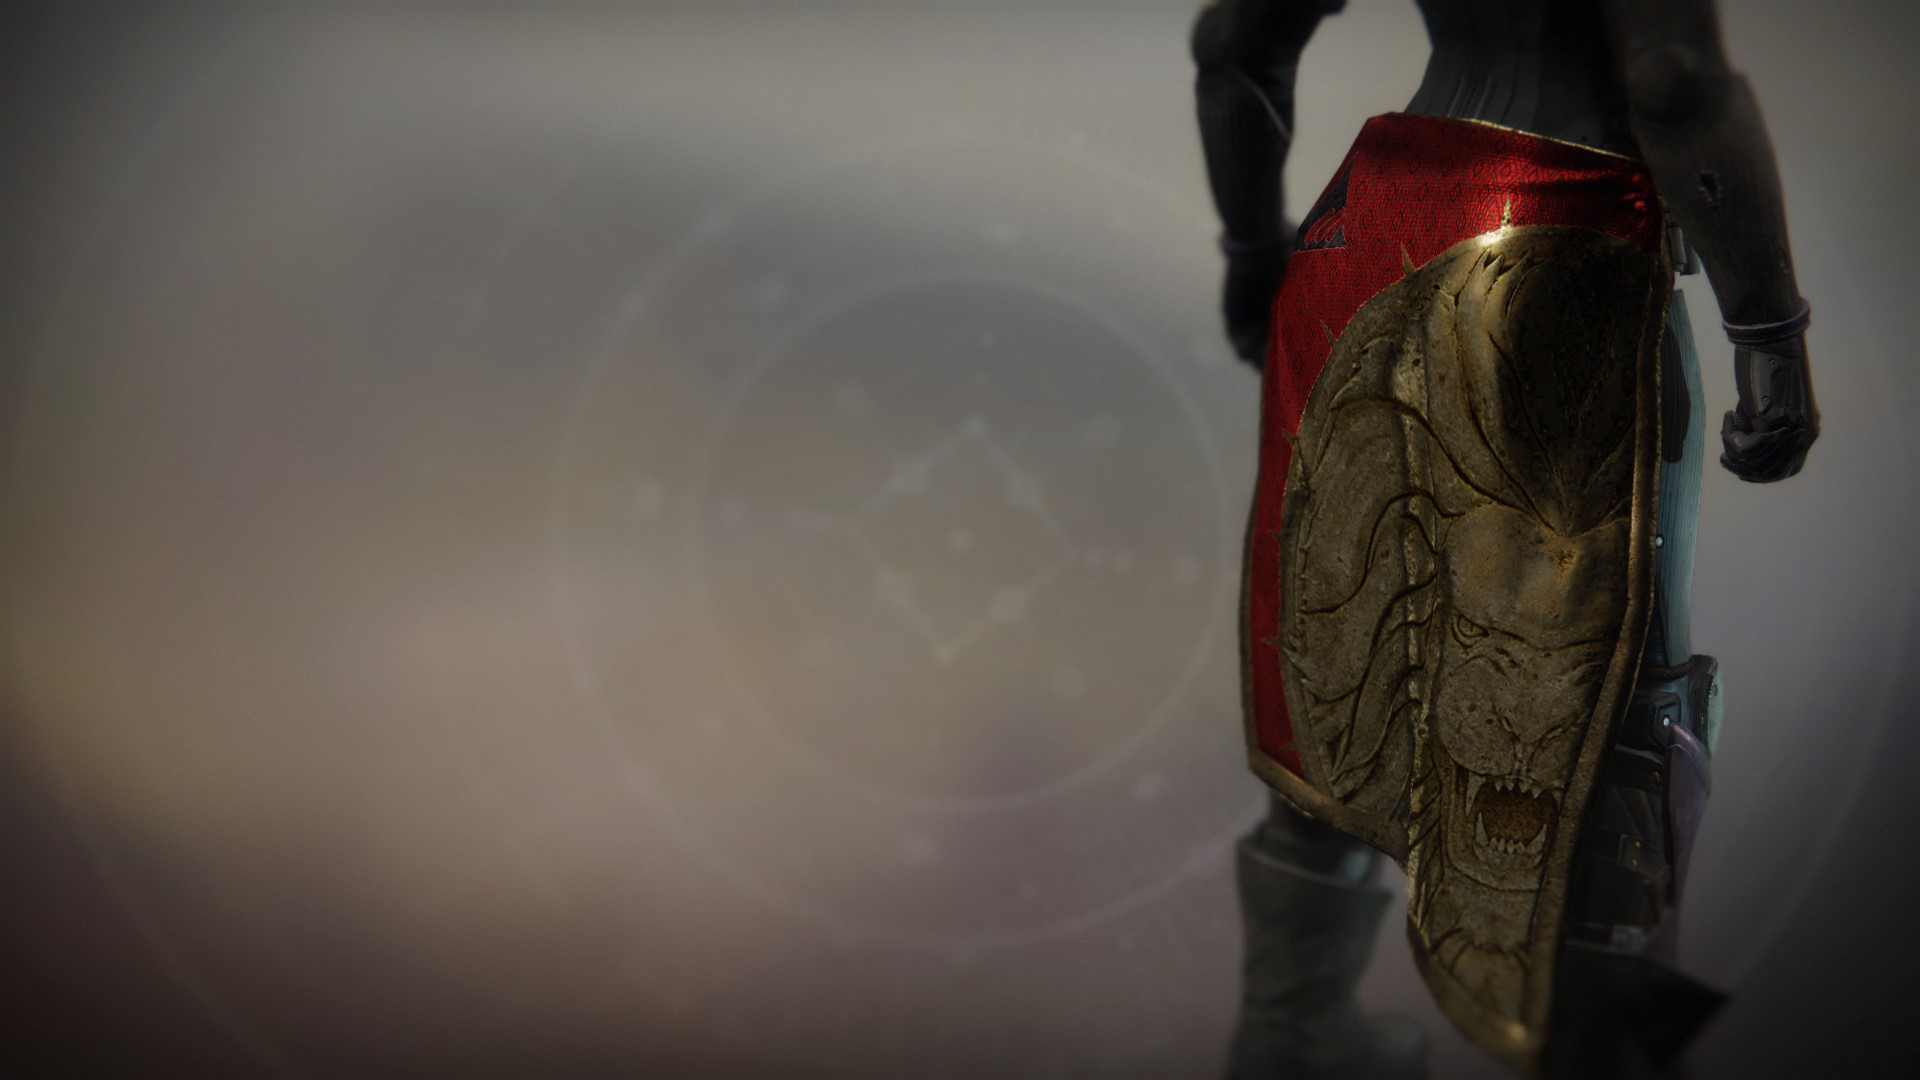 An in-game render of the Sovereign Lion Ornament.